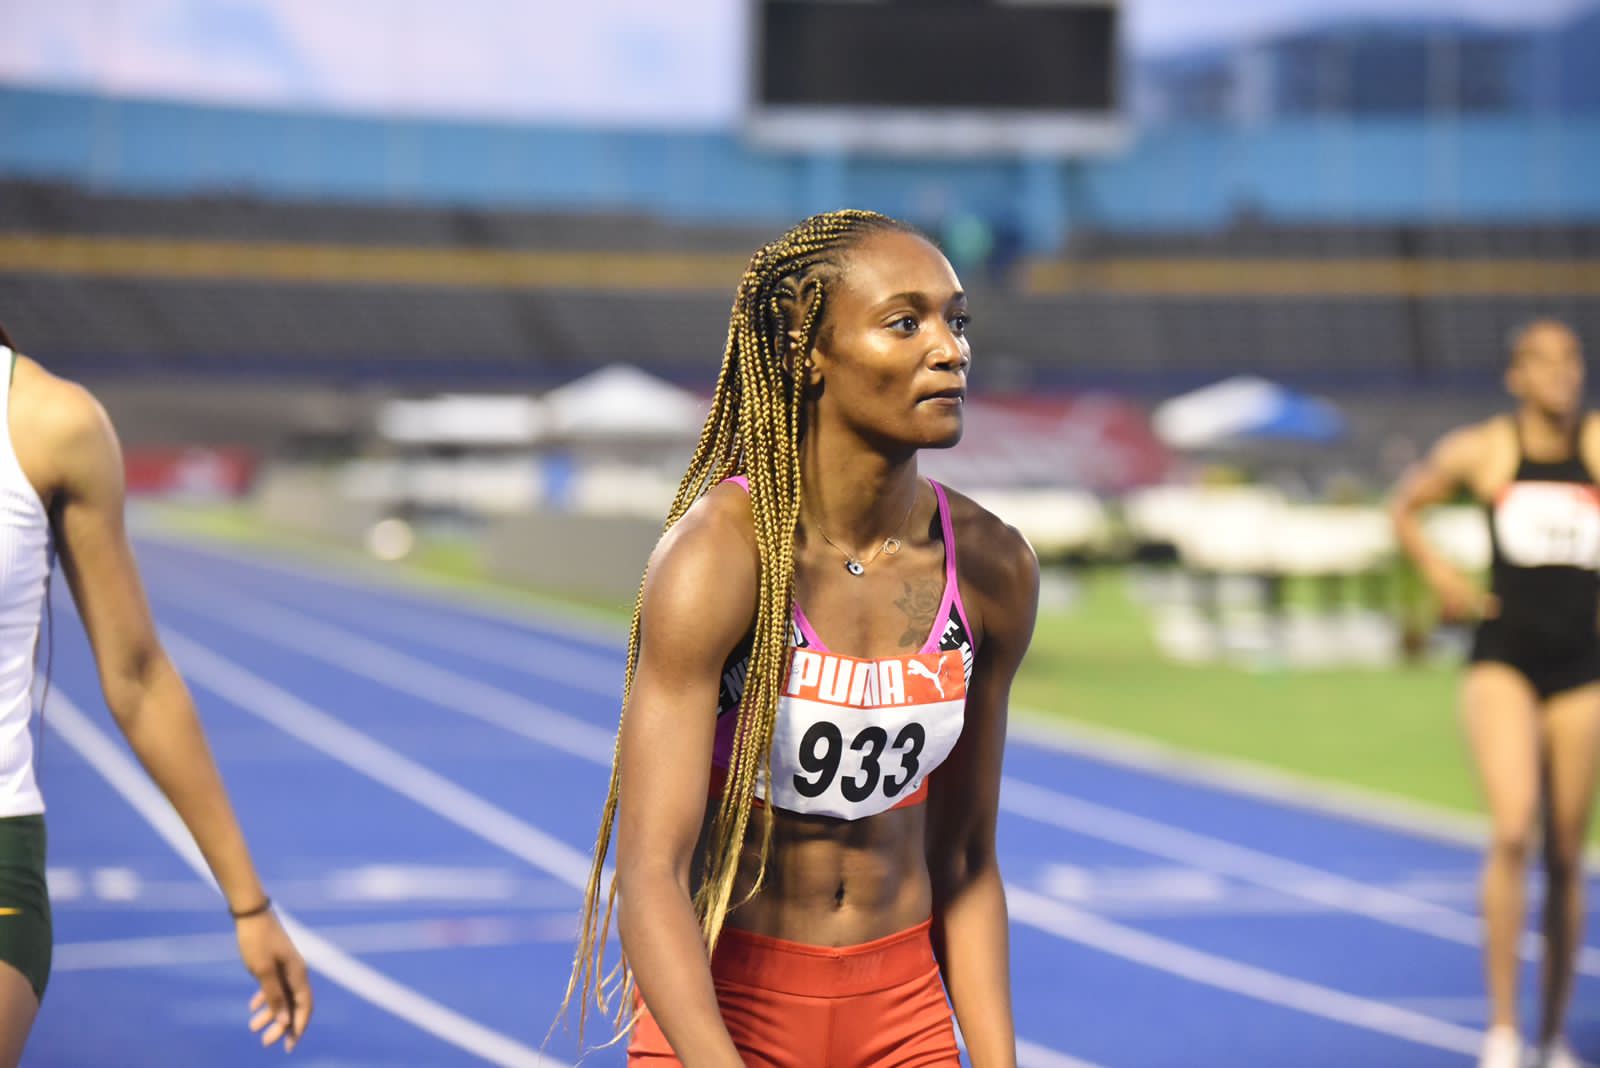 Leah Anderson Makes History as New Jamaica 500m Indoor Record Holder